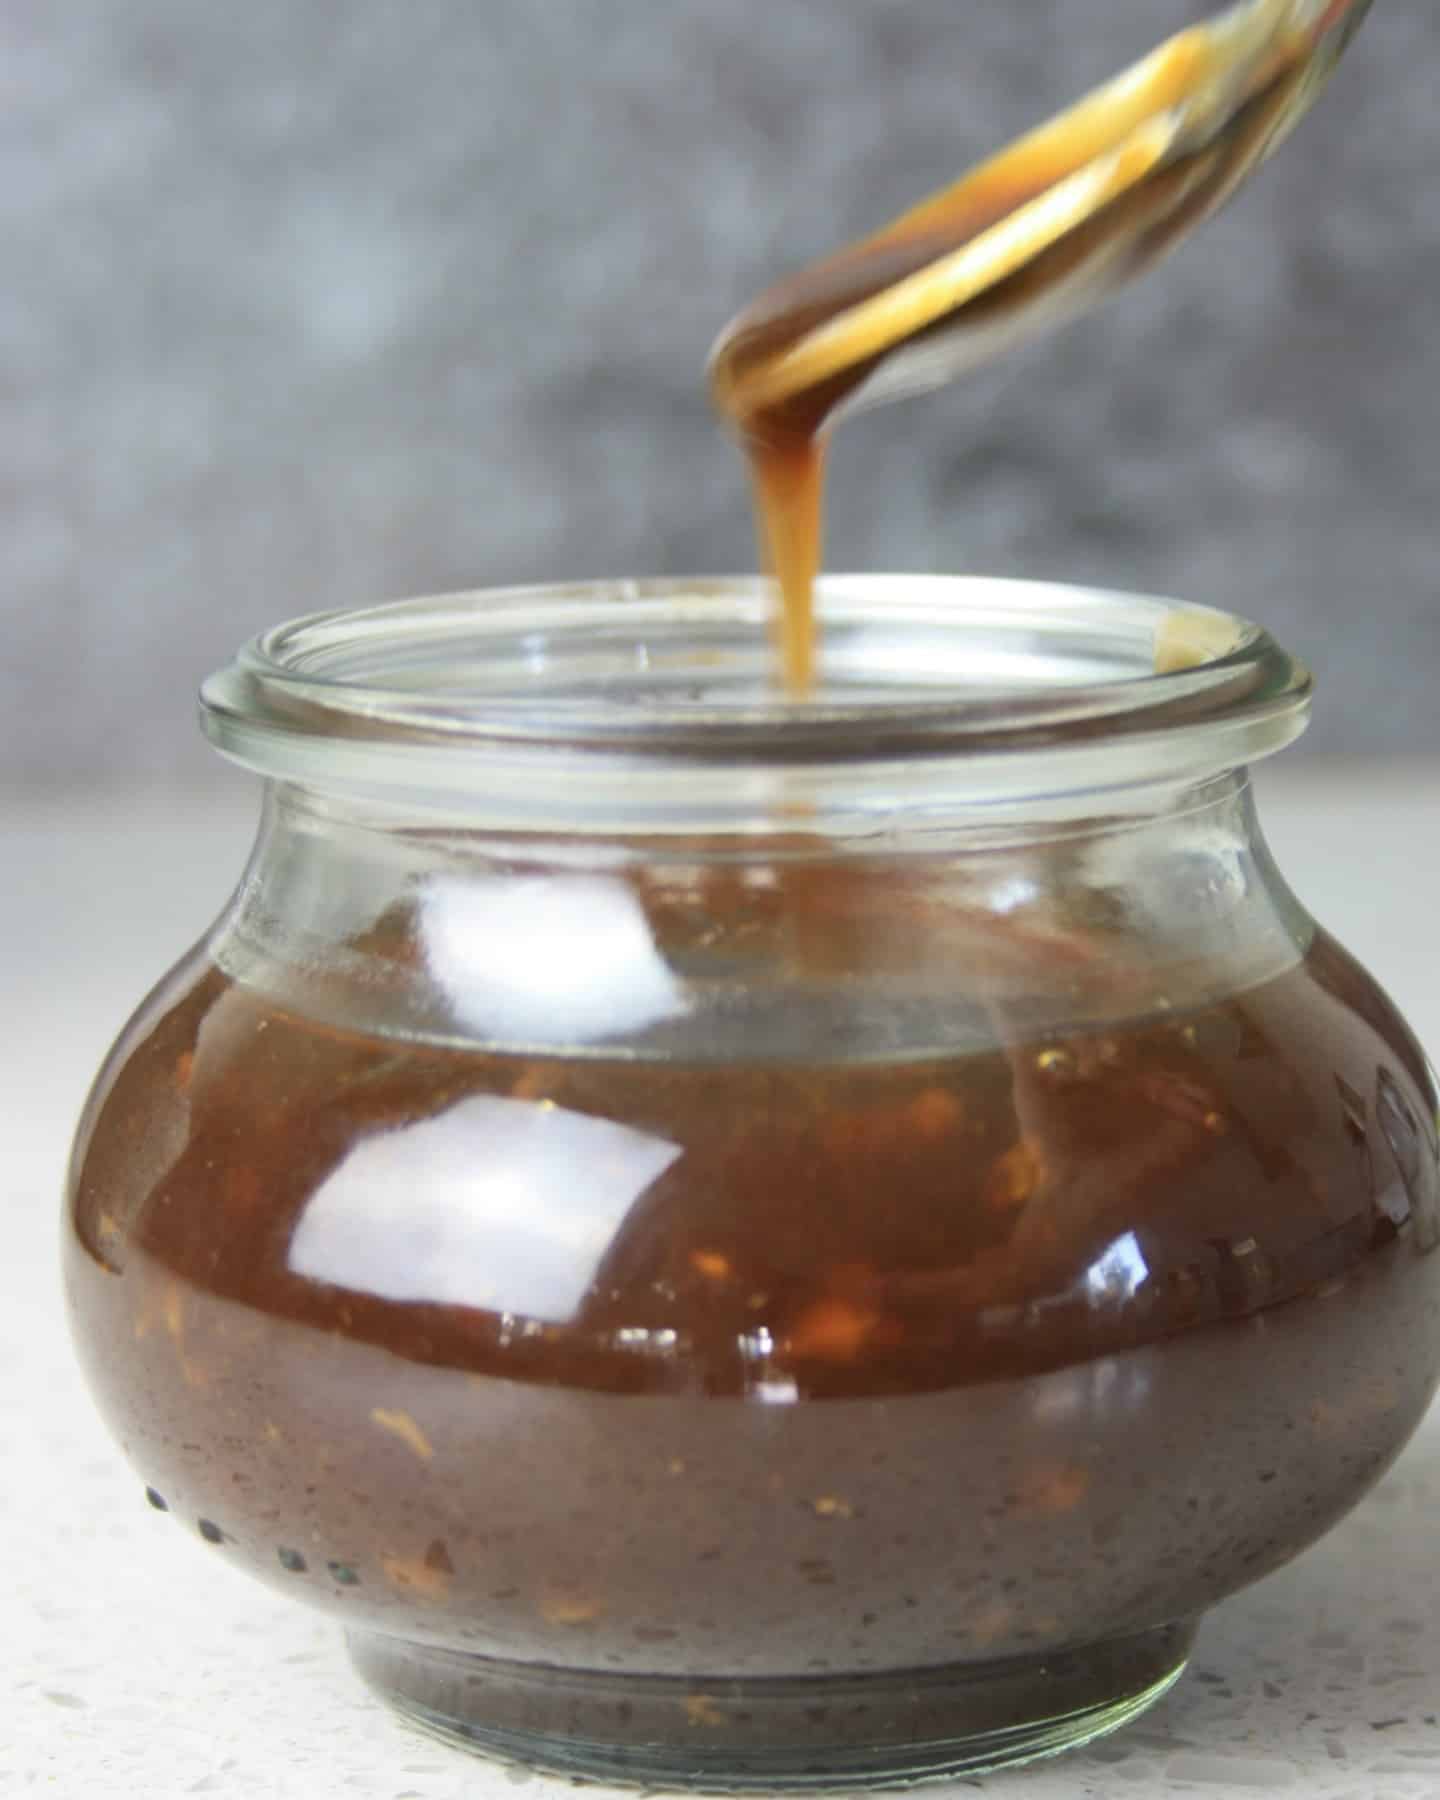 sauce dribbling of a spoon into a glass jar